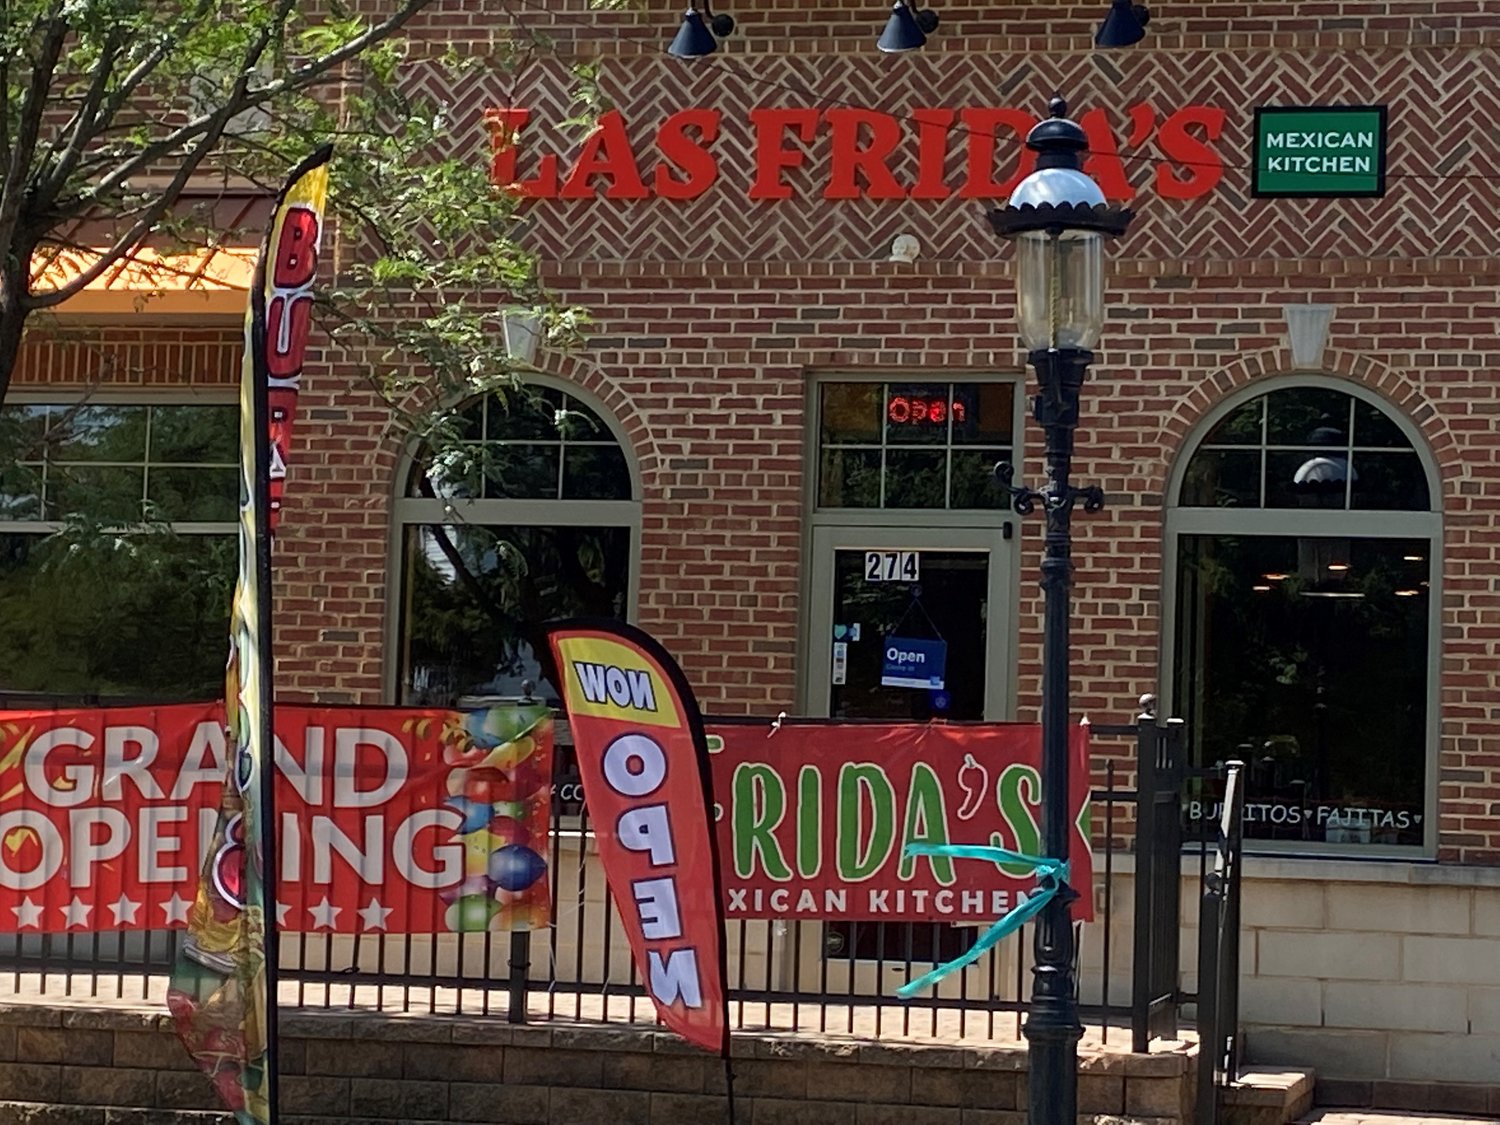 Las Frida’s Mexican Kitchen at 274 N. Main St., has an extensive menu of traditional Mexican dishes for breakfast (served until 3 p.m.), lunch and dinner, all homemade.